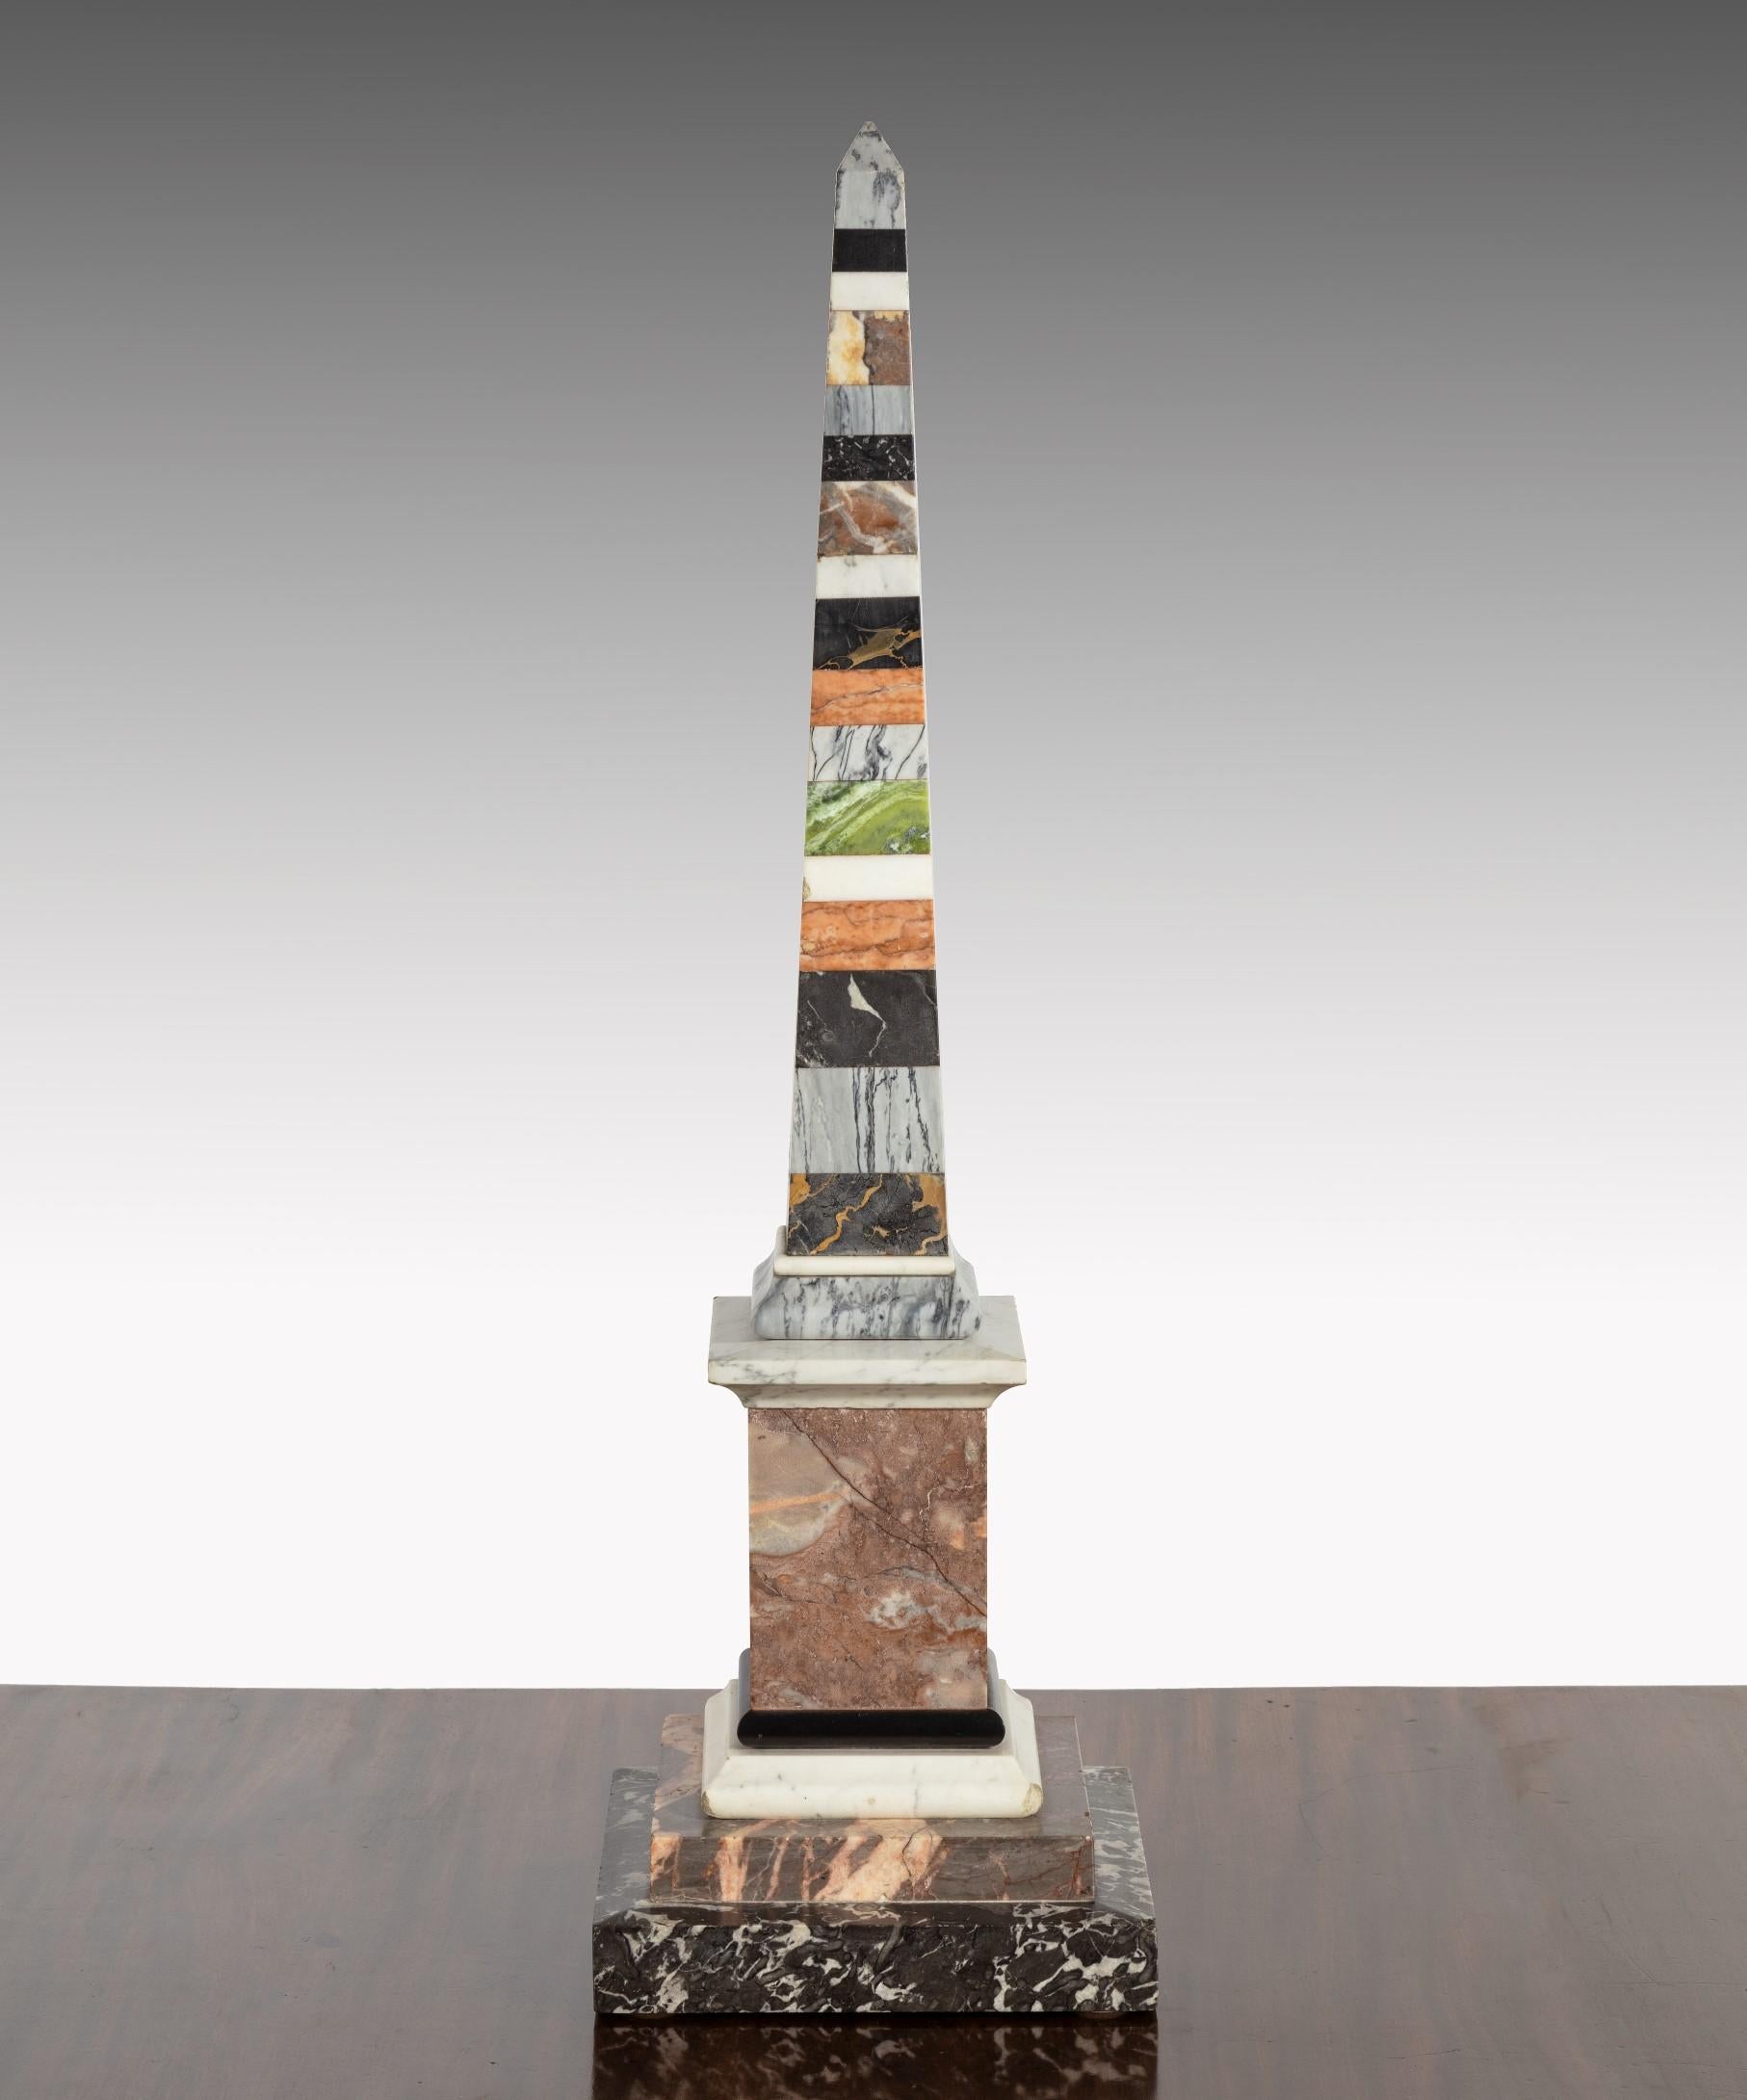 A superb Grand Tour specimen marble obelisk constructed from a variety of specimen marbles. The obelisk is in good country house condition and is an unusually large example.